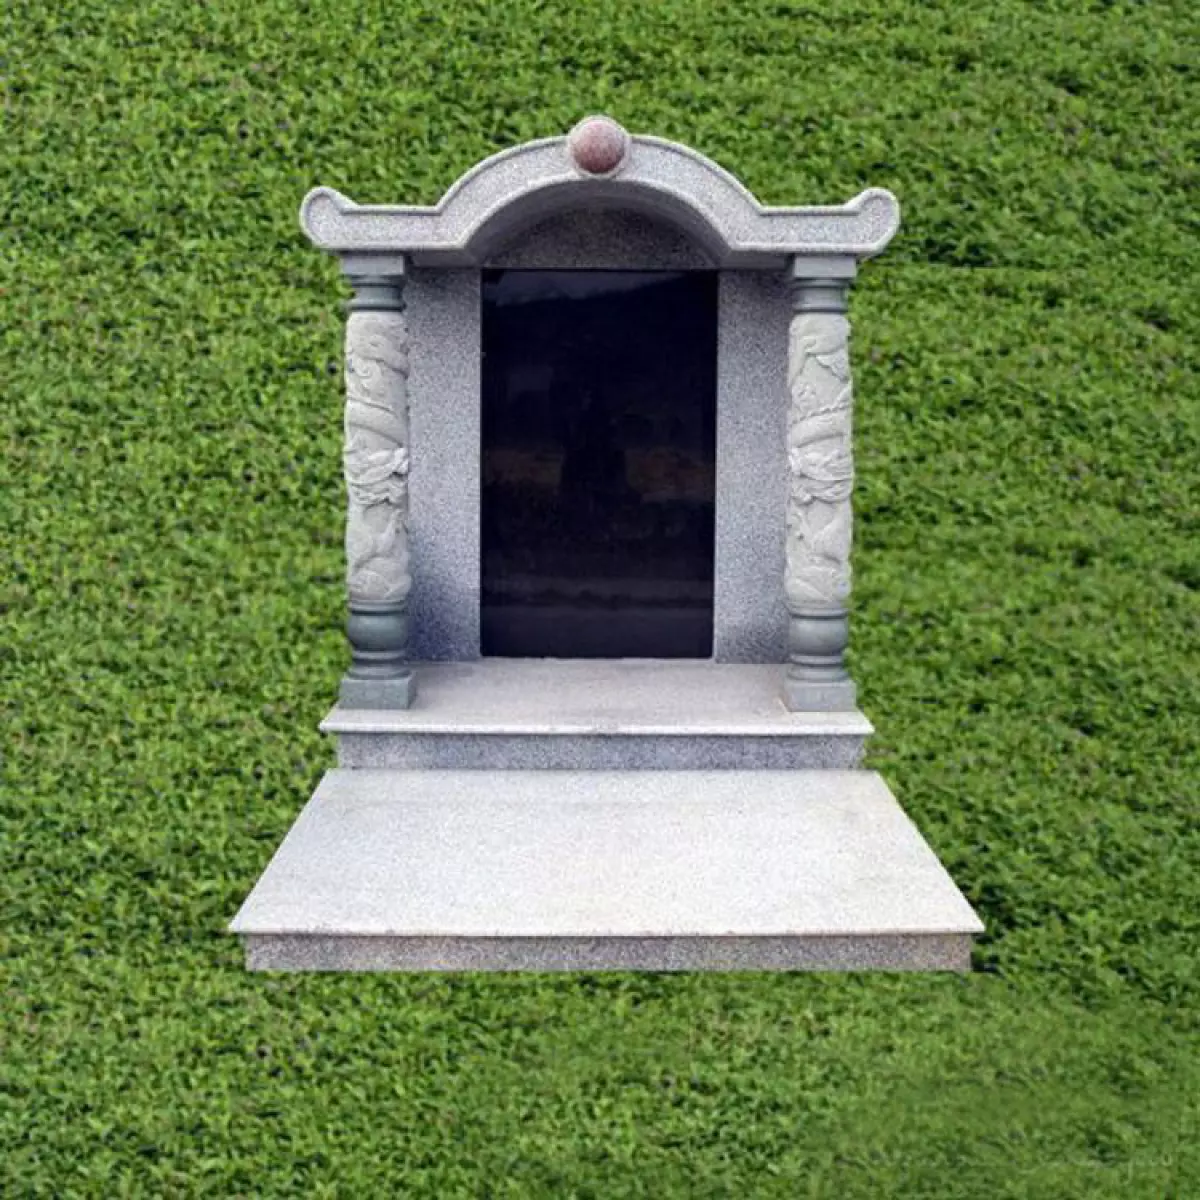 China gravestone feng shui: teach you how to monument